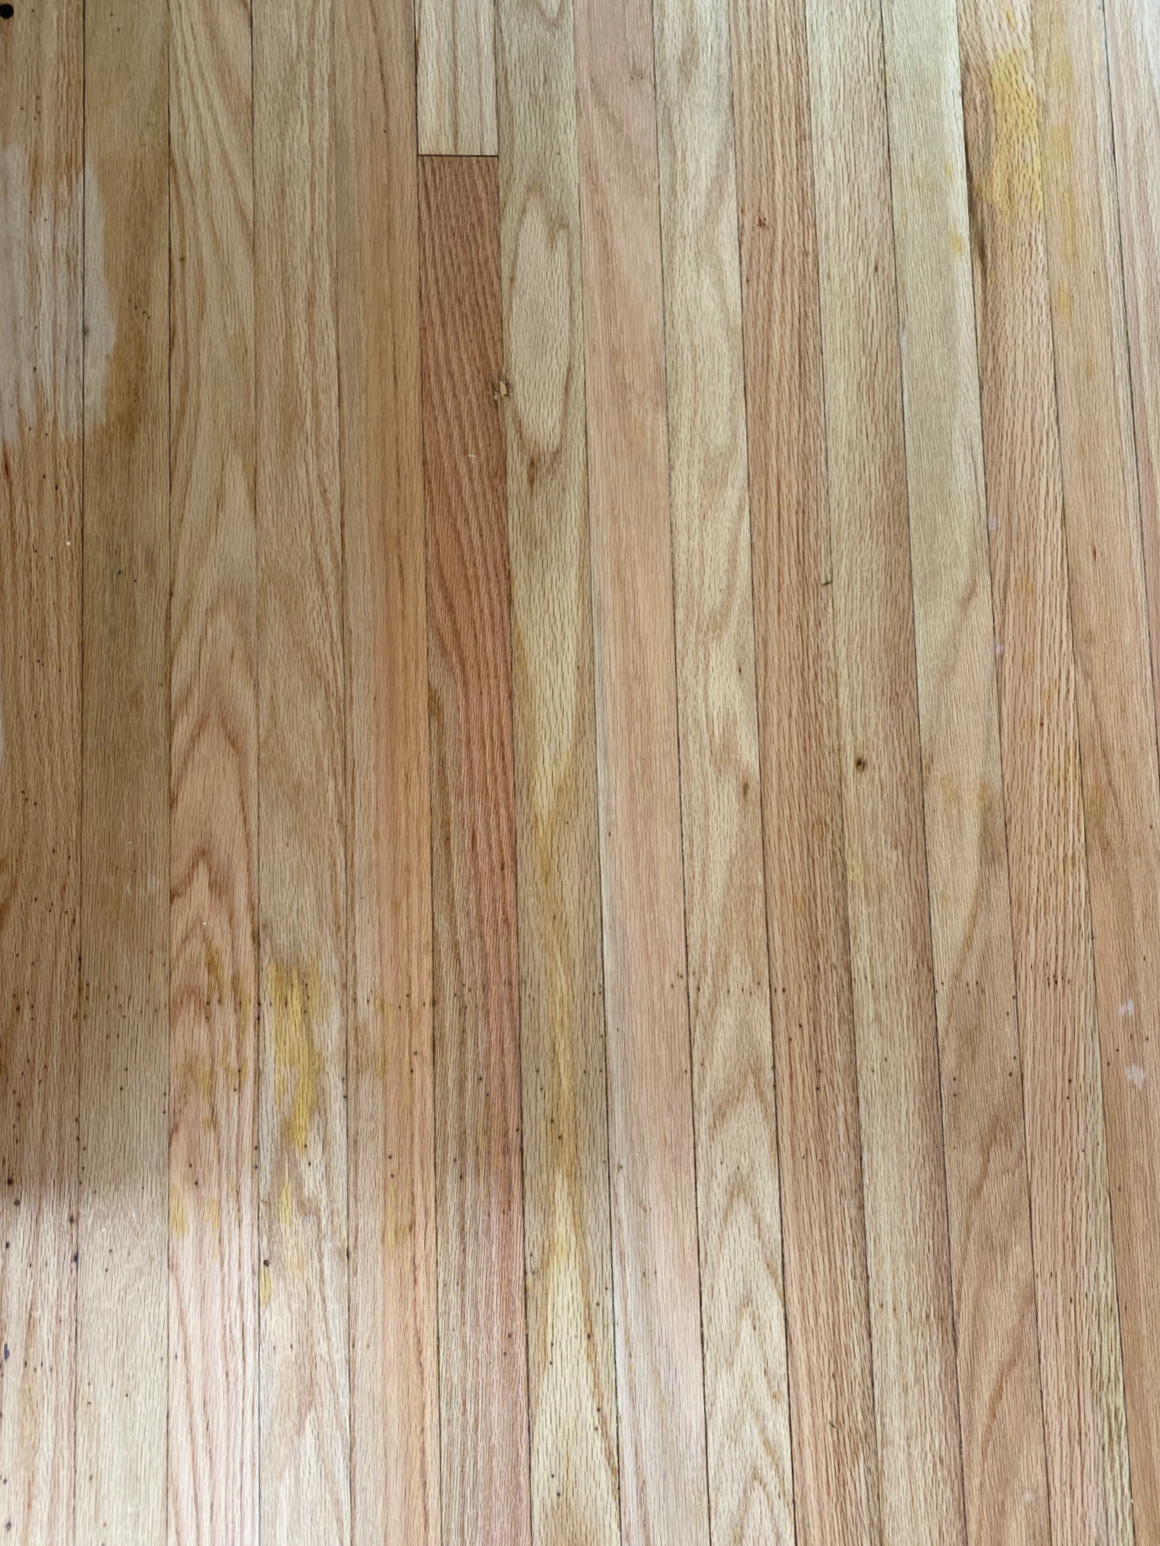 Our Refinished Oak Floors And Details, Hardwood Floor Stain Colors For Oak